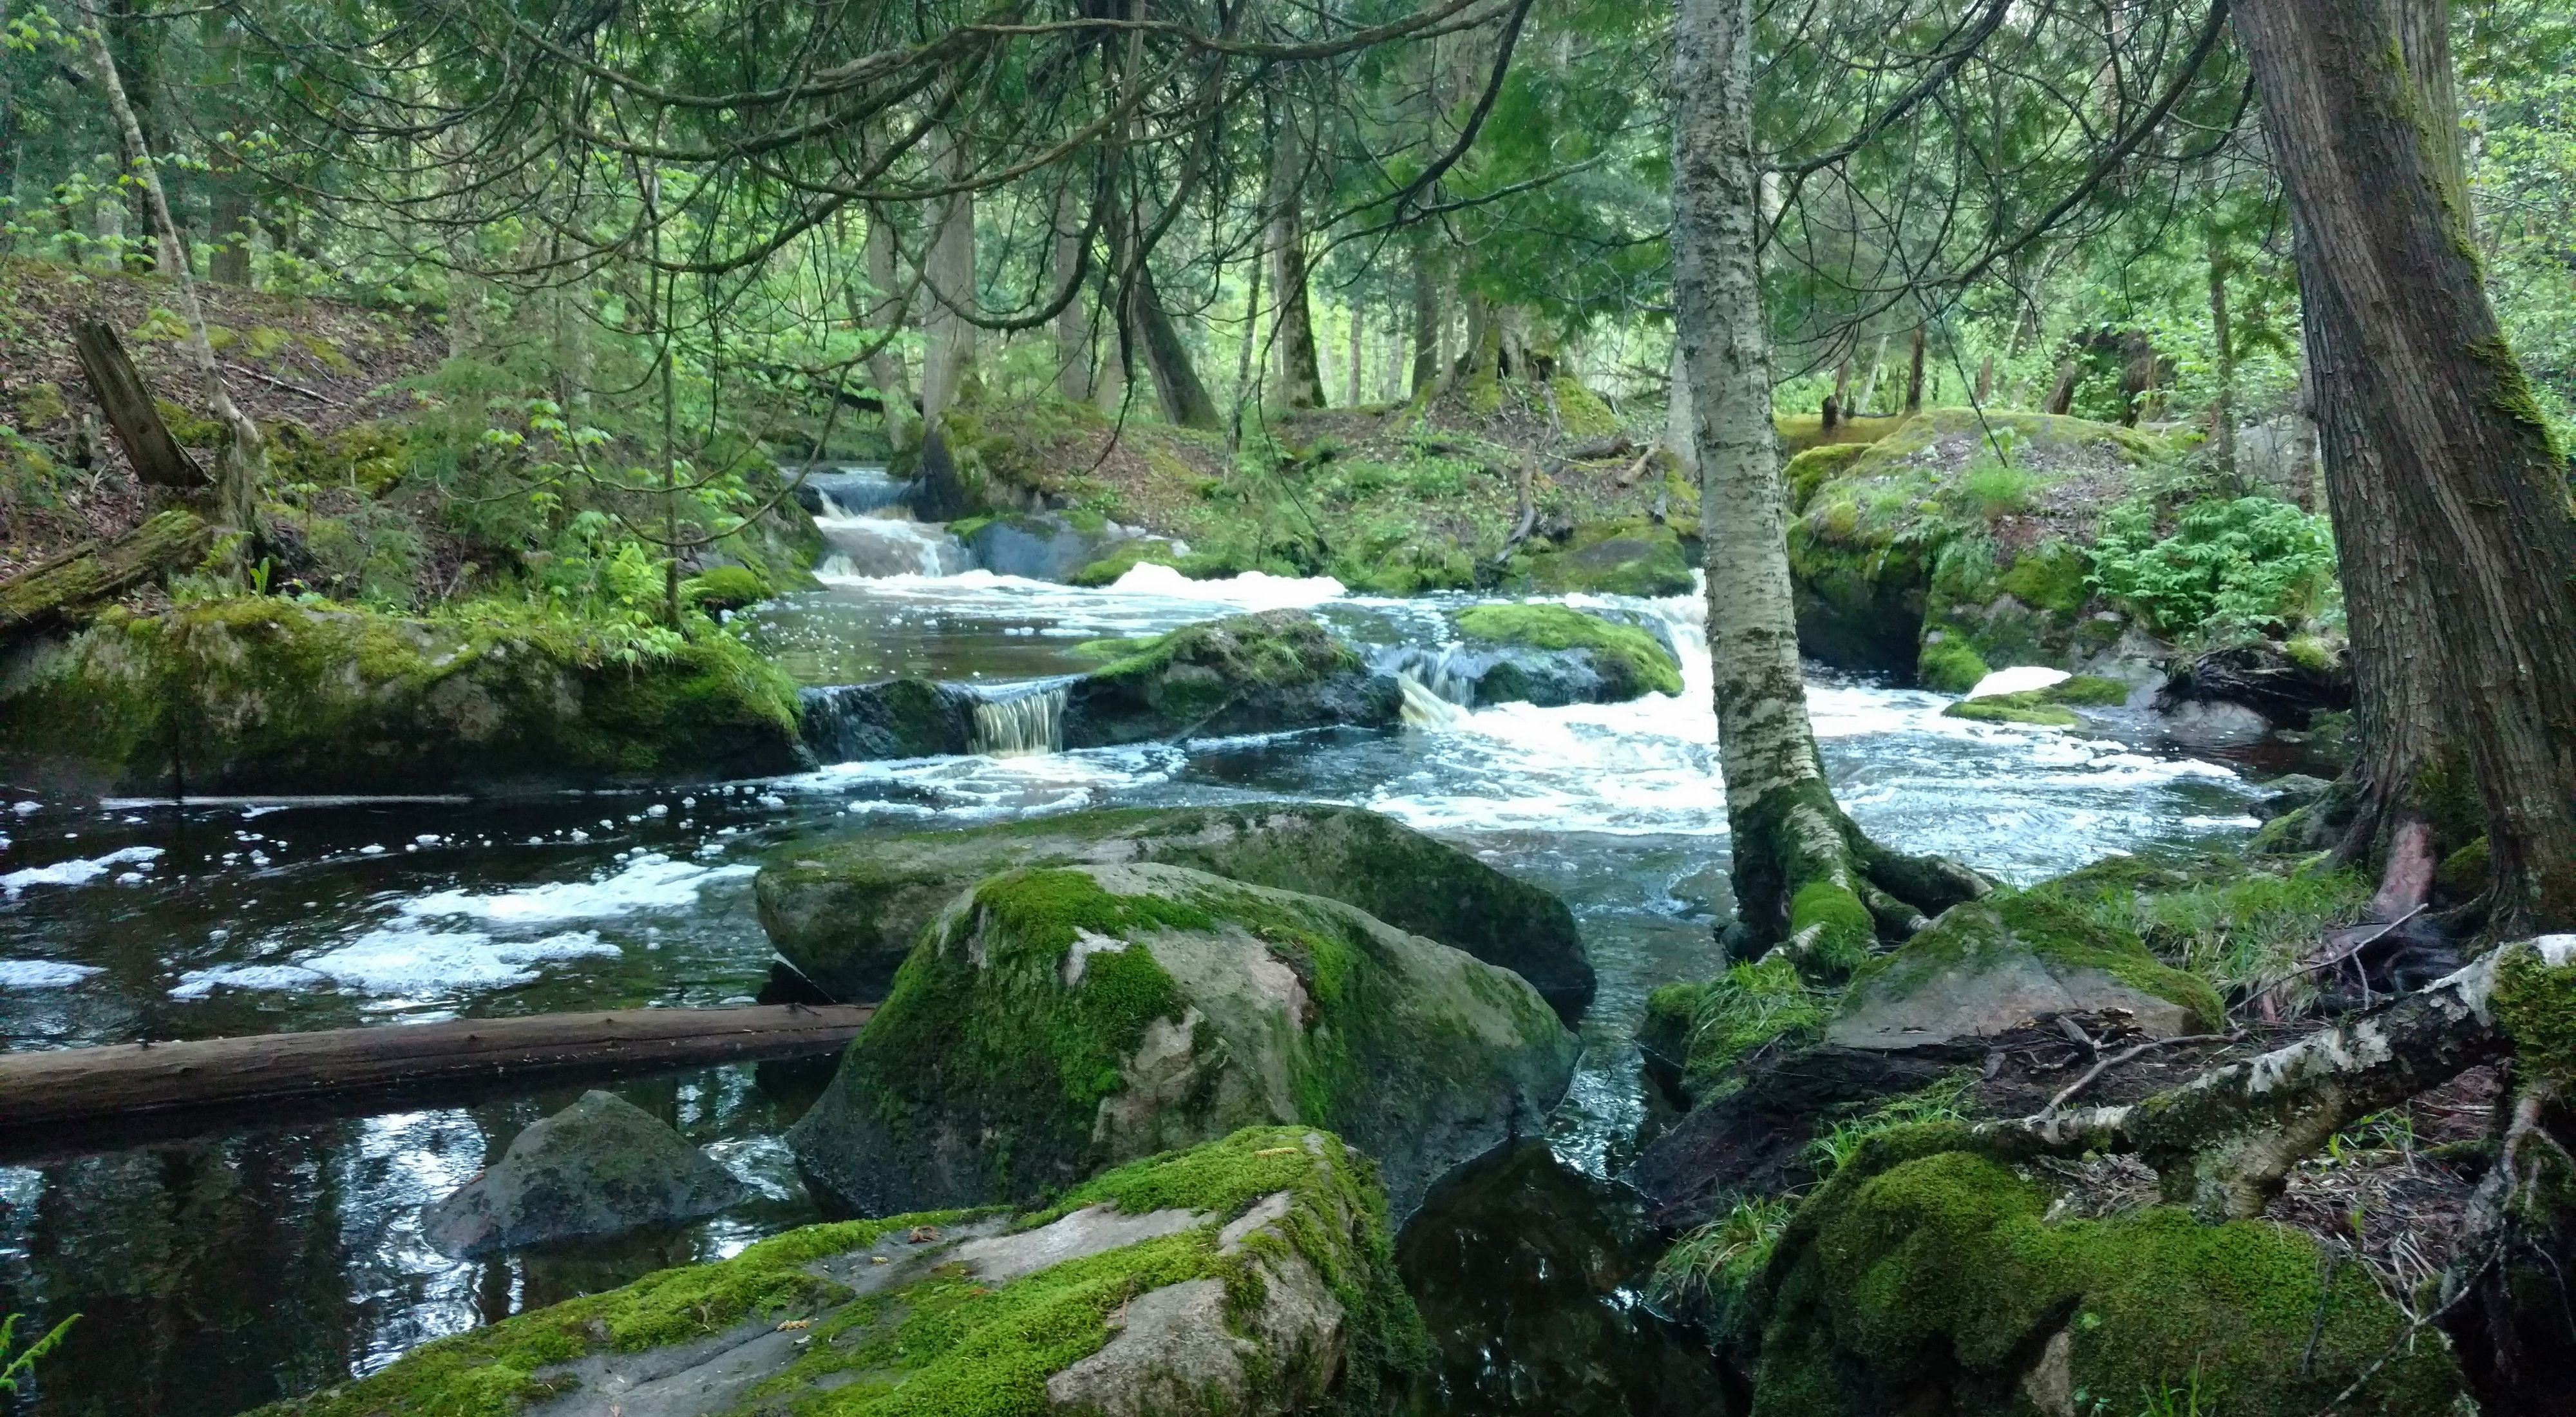 forest river in spring. water flows among the mossy rocks